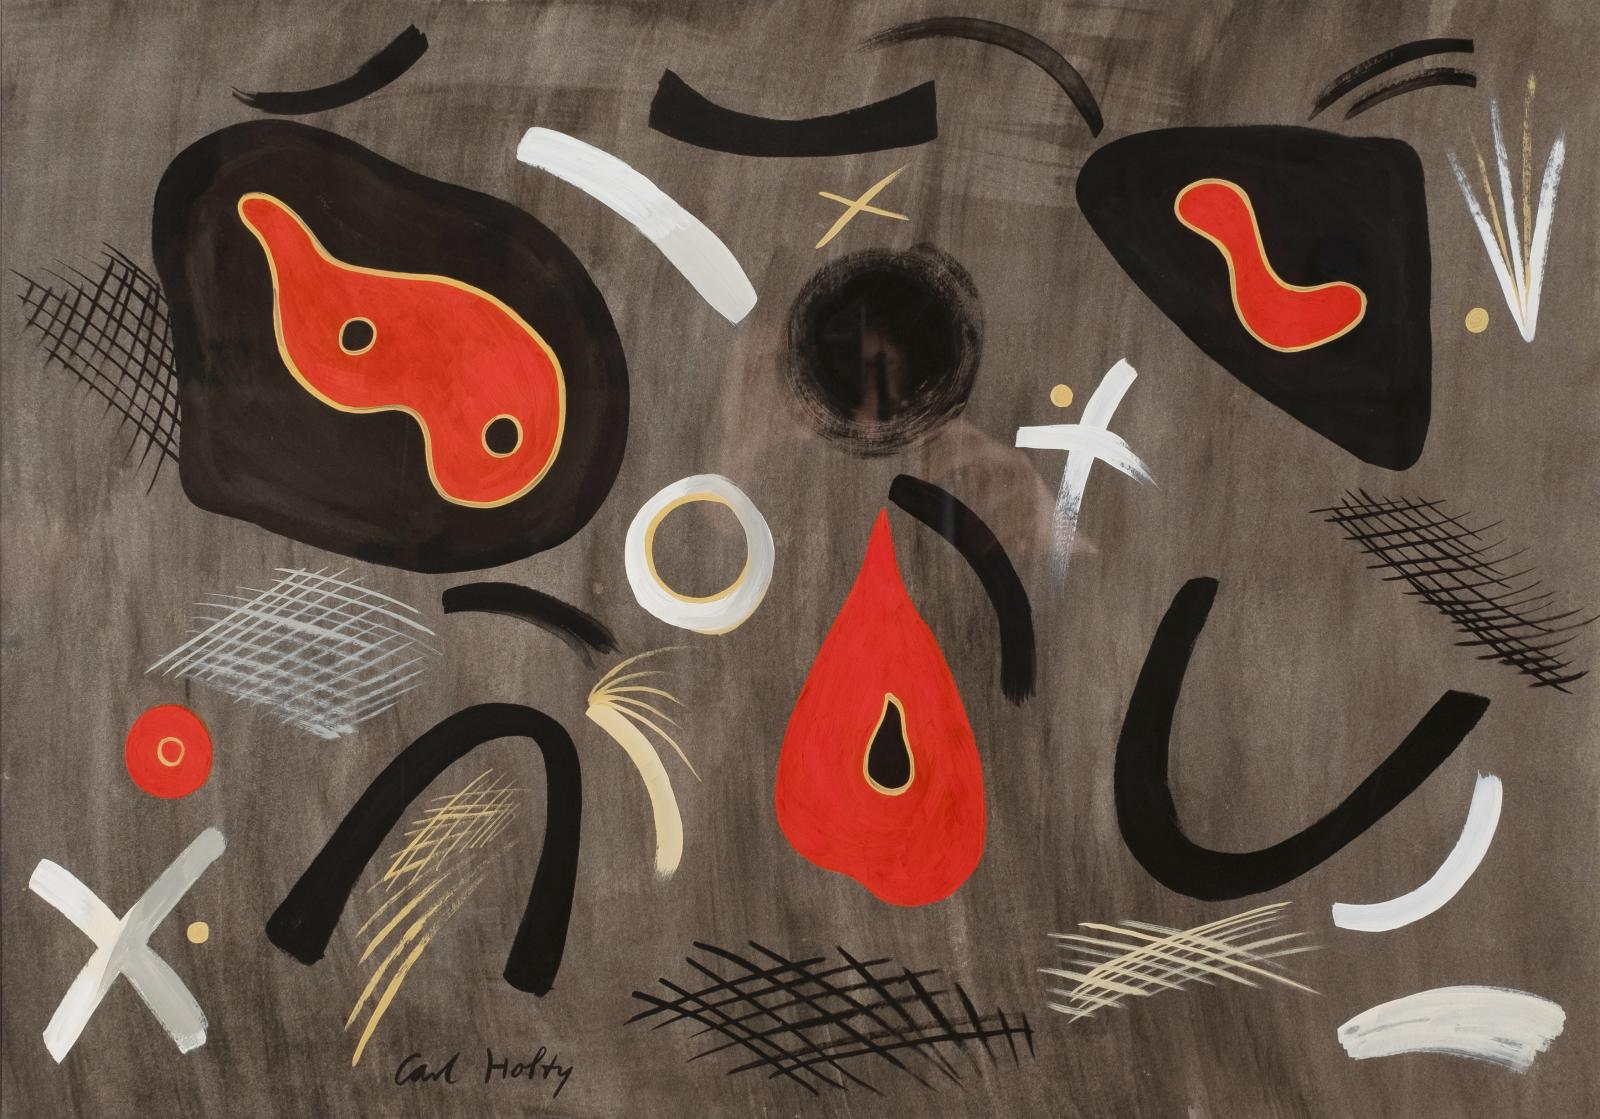 Carl Holty, Biomorphic Abstraction, c. 1936